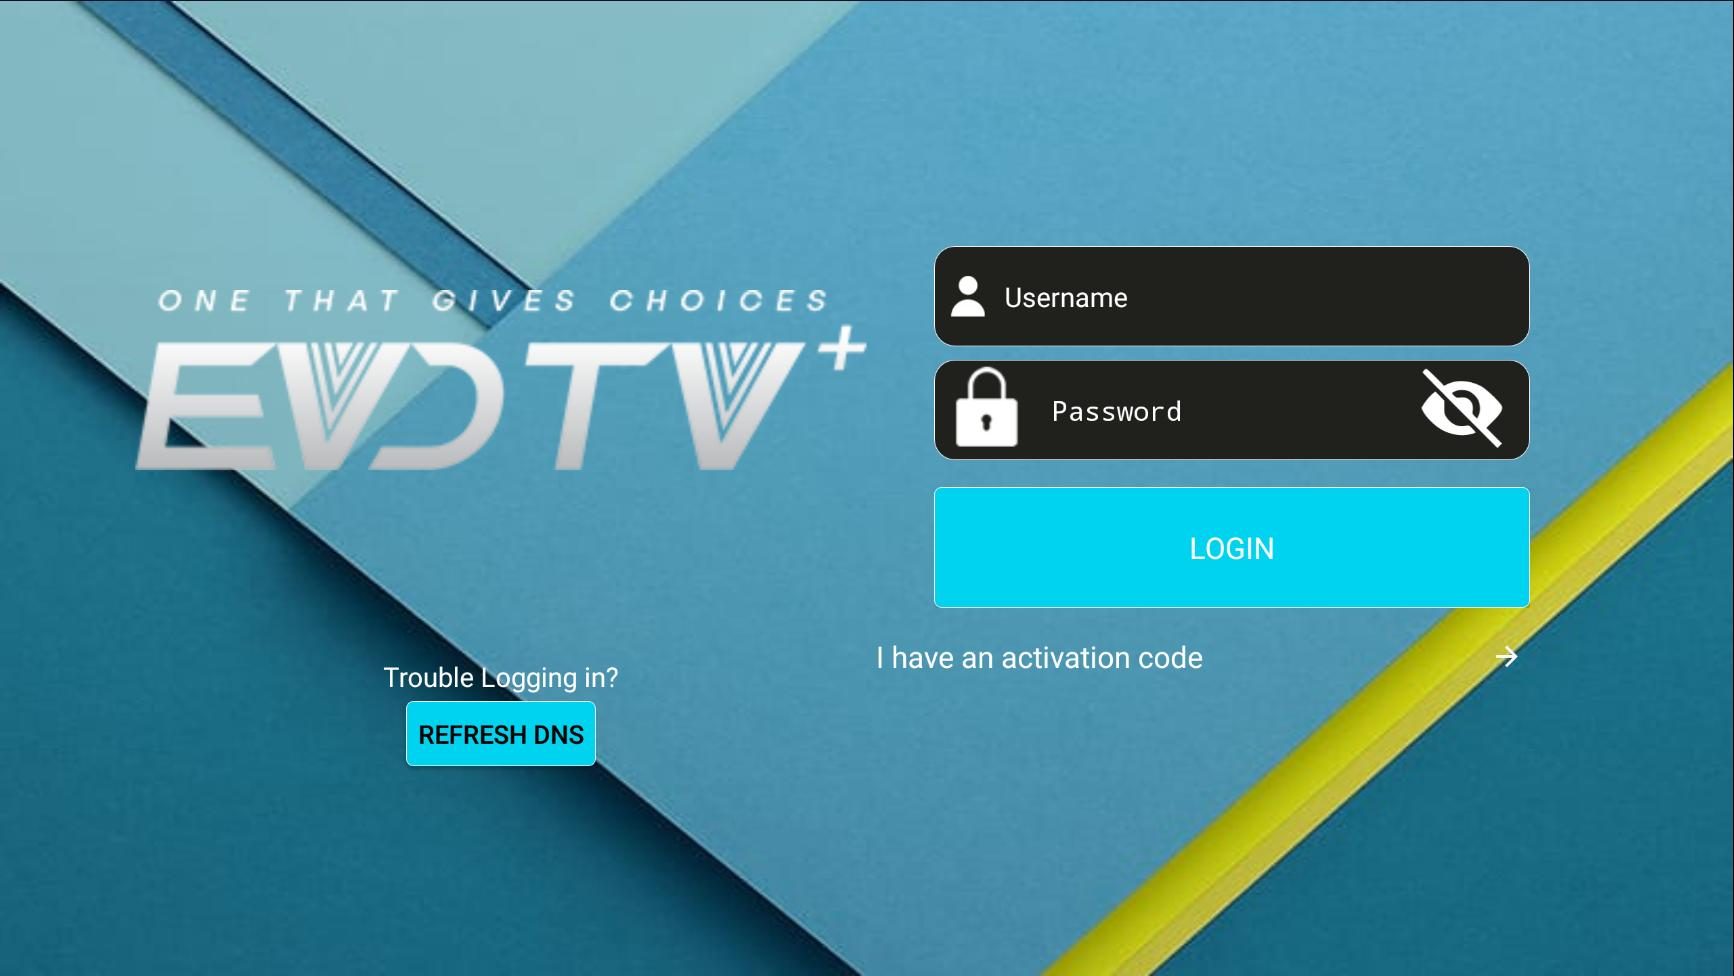 Cut the Cord, Embrace Entertainment: EVDTV IPTV - Your All-Access Pass to Premium Content